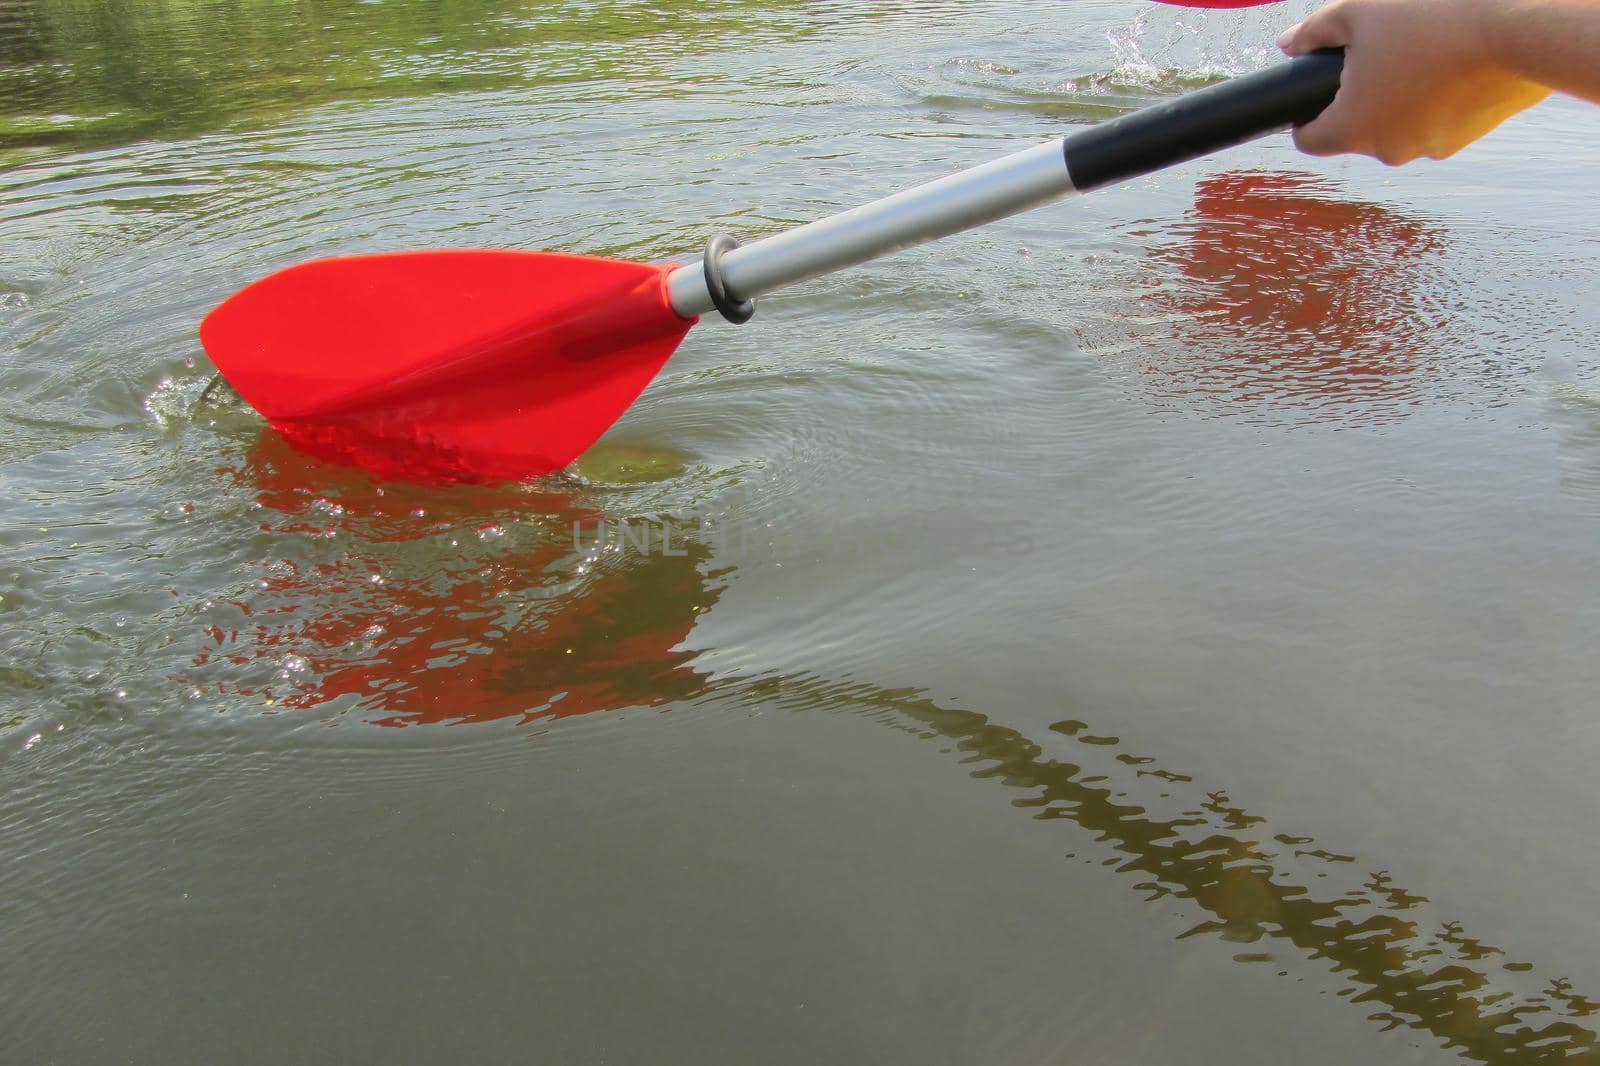 On image: Red paddles for white water rafting and kayaking. Close up of a hand with red paddle kayaking or rafting on the river, concept of spring water sports. Selective focus.